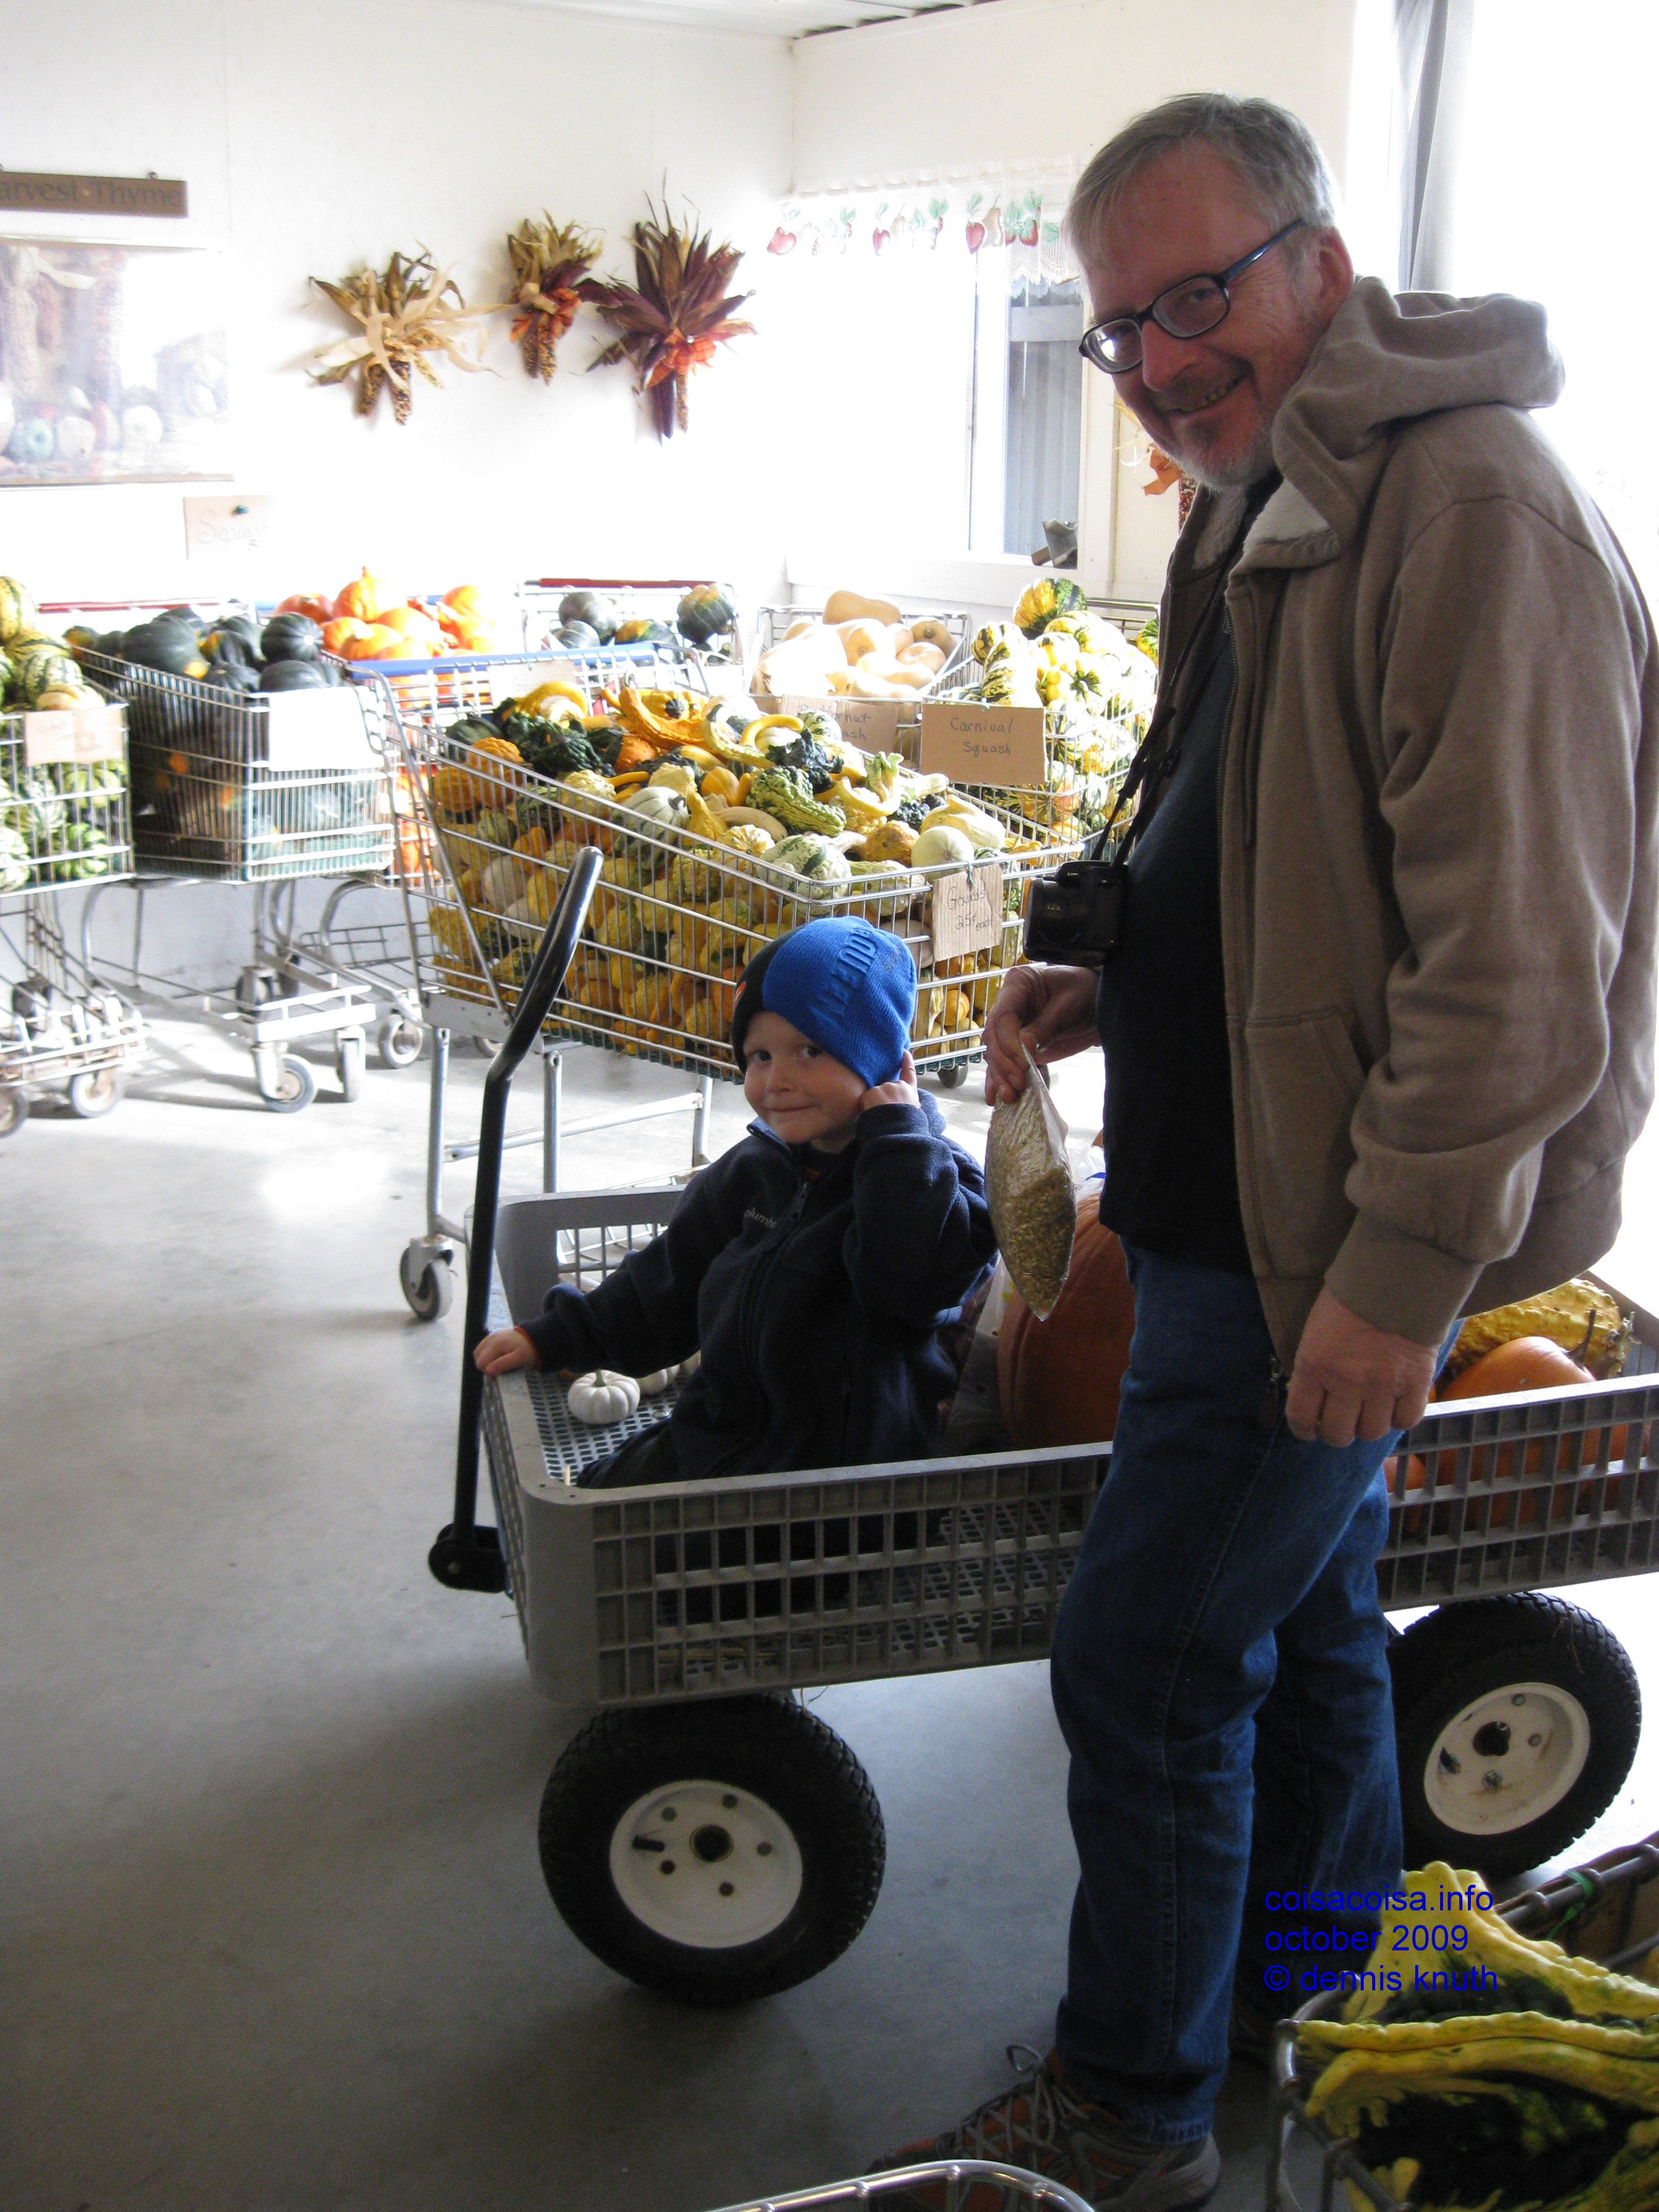 A wagon full of gourds to purchase